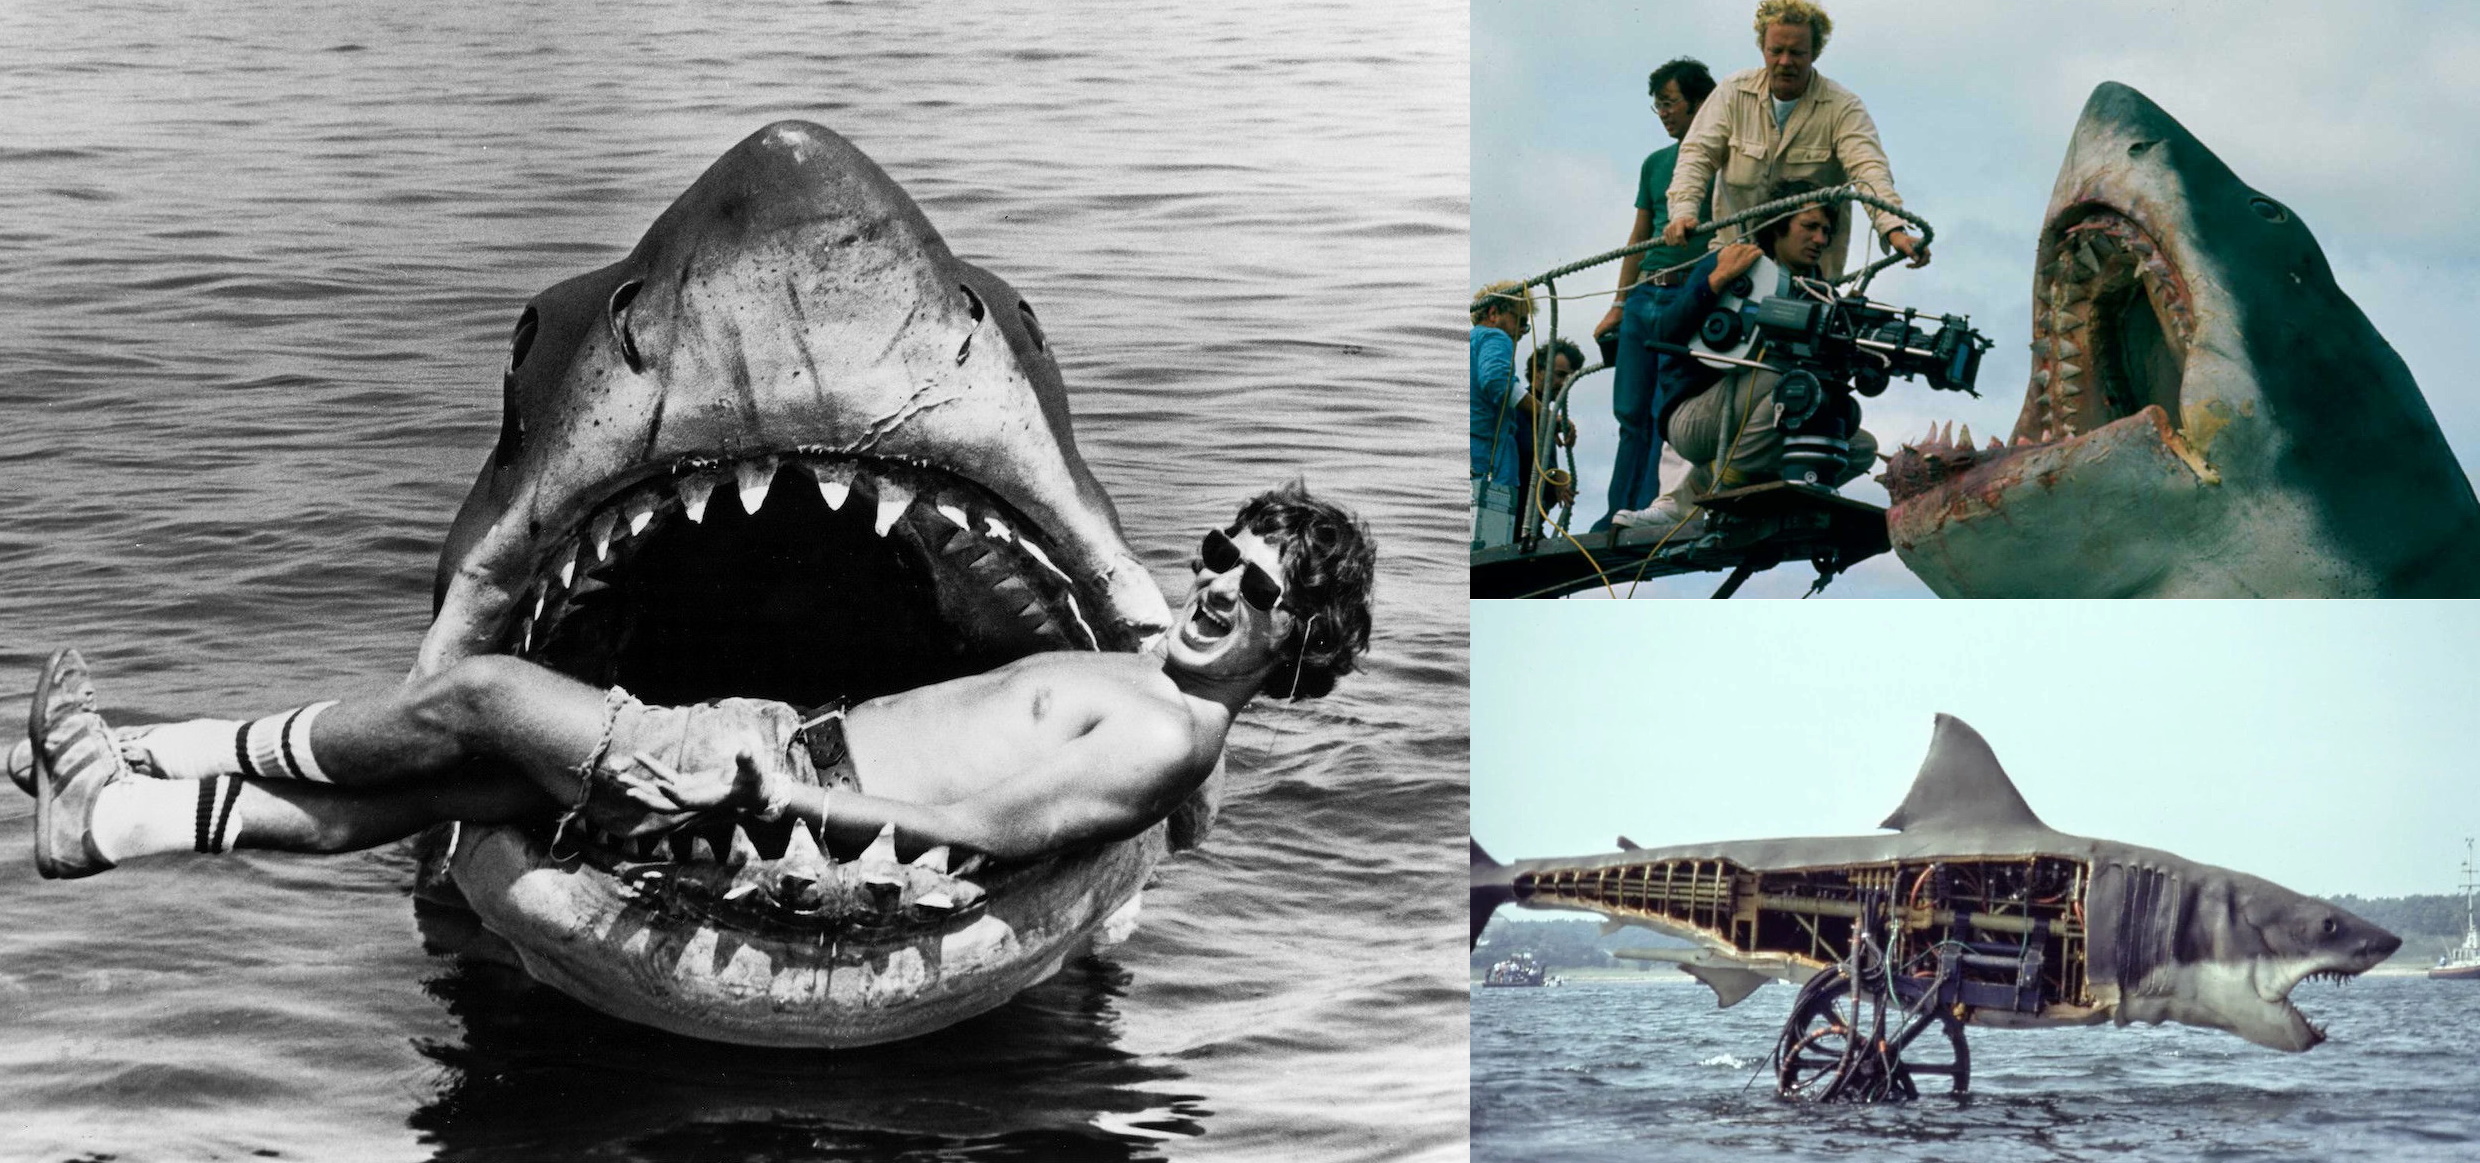 FilmPhonic on Twitter: "#TriviaTuesday: The unreliable mechanical shark  used in 1975's 'Jaws' dubbed “Bruce”—named after Spielberg's lawyer—was one  of three made at a cost of around $250,000 each, around 10% of the